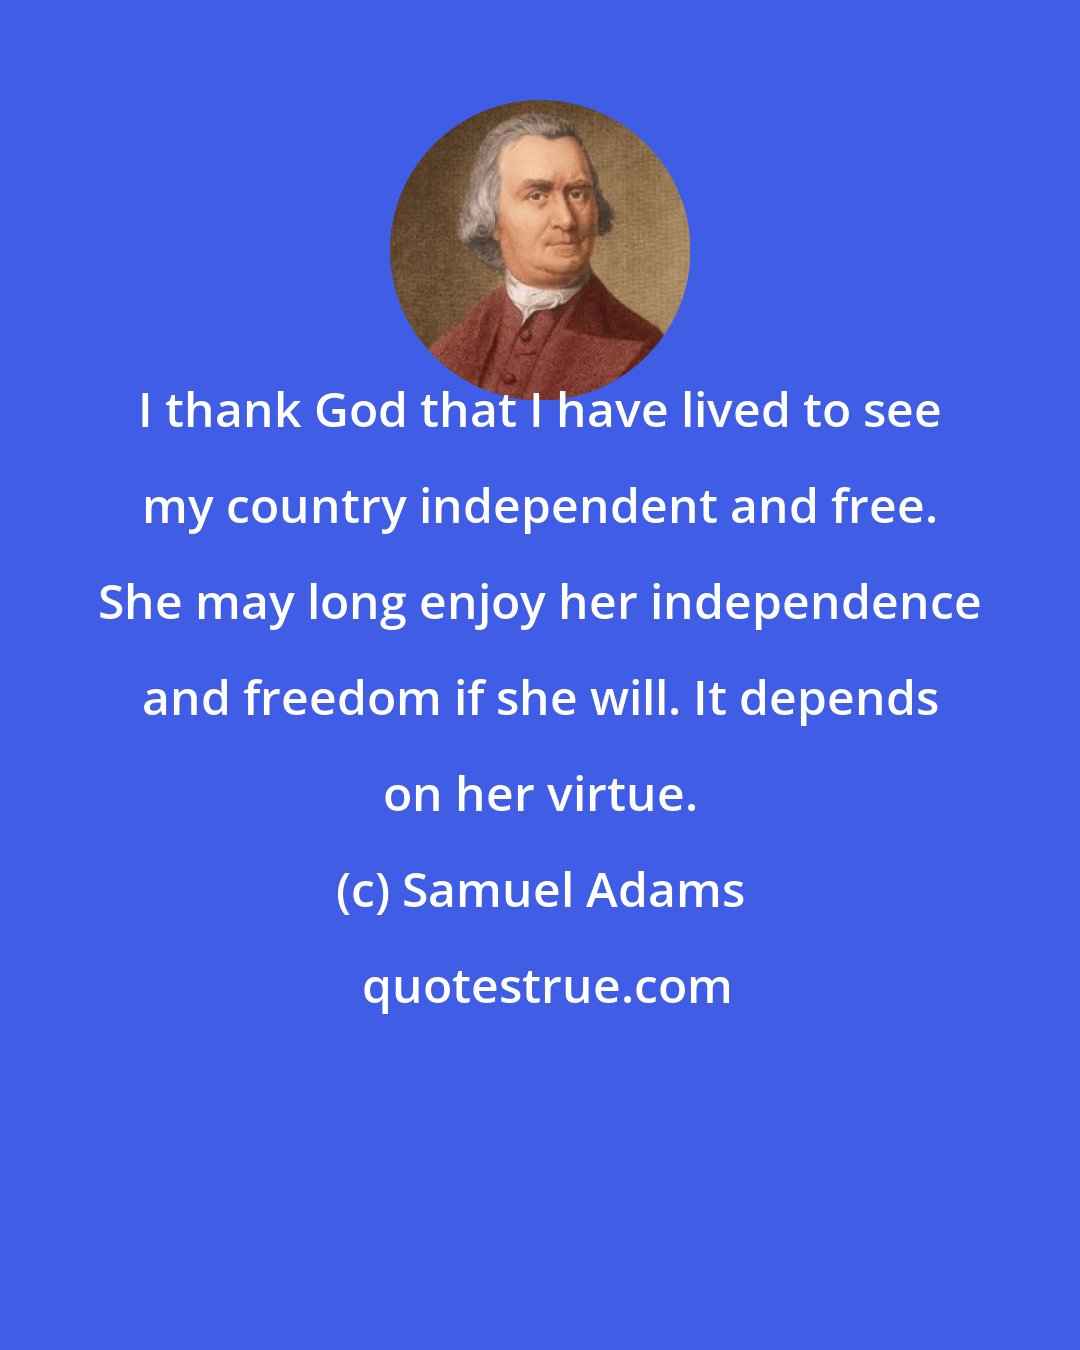 Samuel Adams: I thank God that I have lived to see my country independent and free. She may long enjoy her independence and freedom if she will. It depends on her virtue.